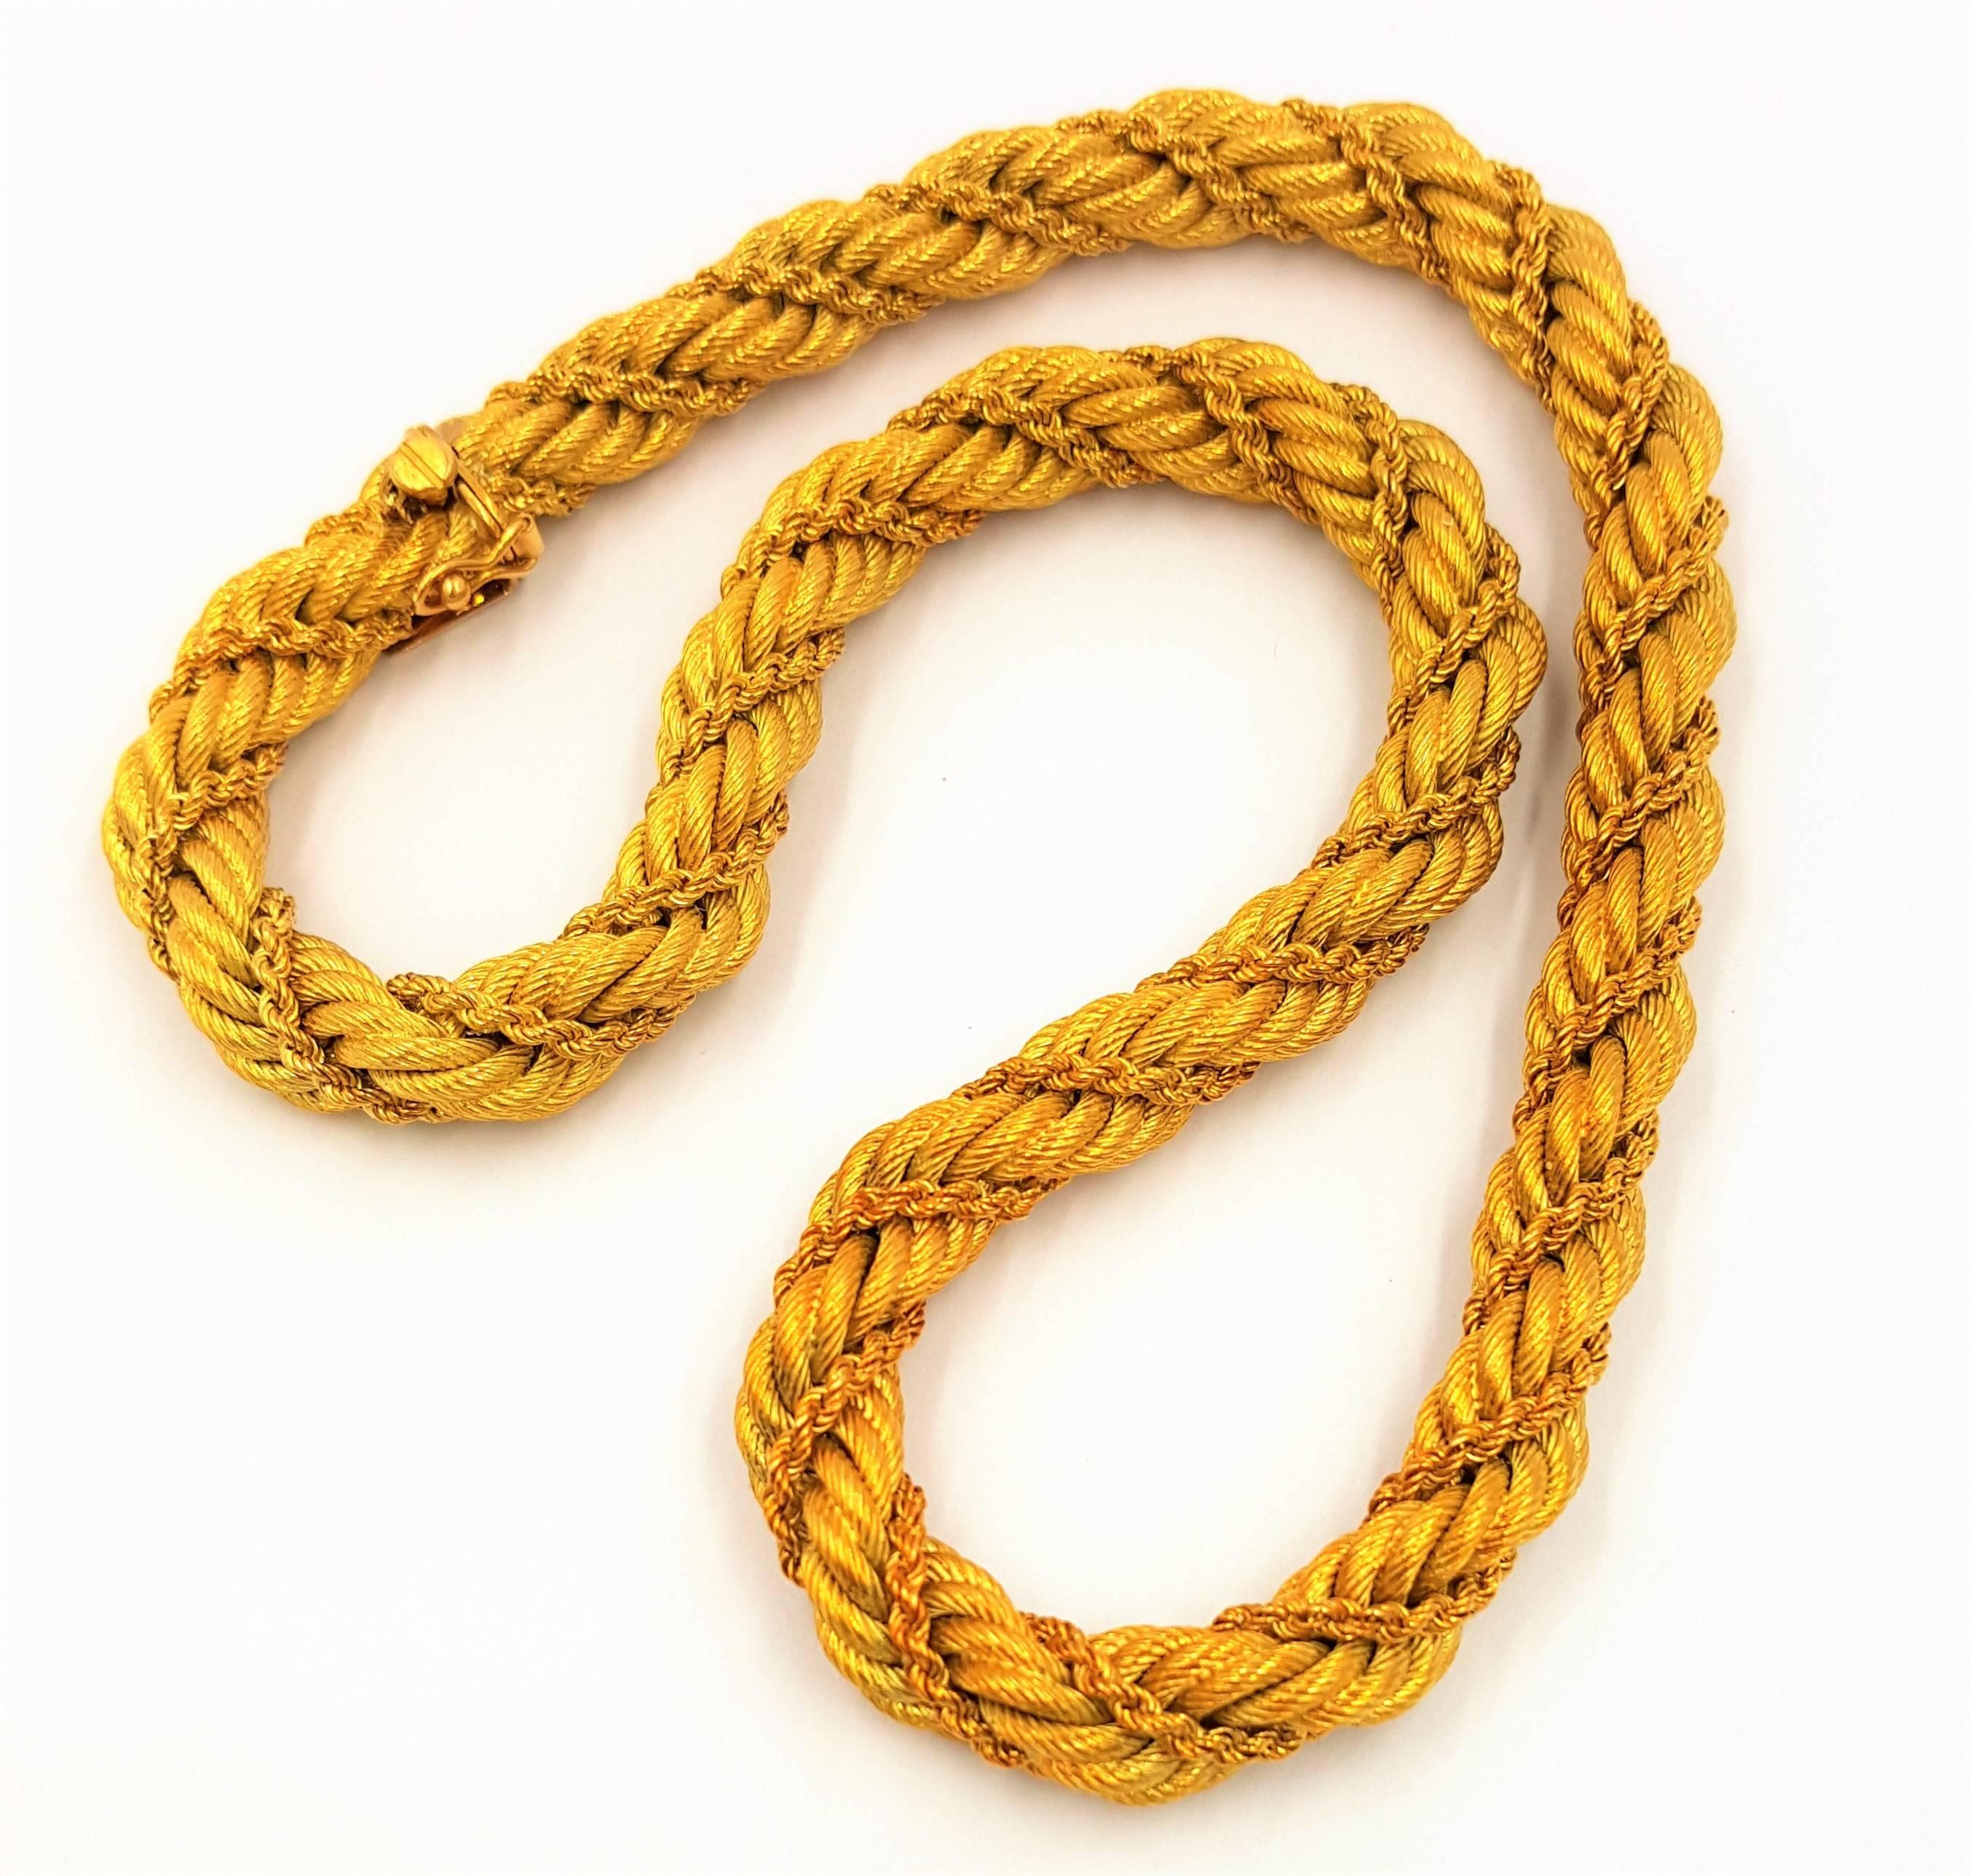 Vintage Tiffany & Co. Golden Light Collection 18K Twisted Gold Rope Necklace In Excellent Condition For Sale In Scottsdale, AZ